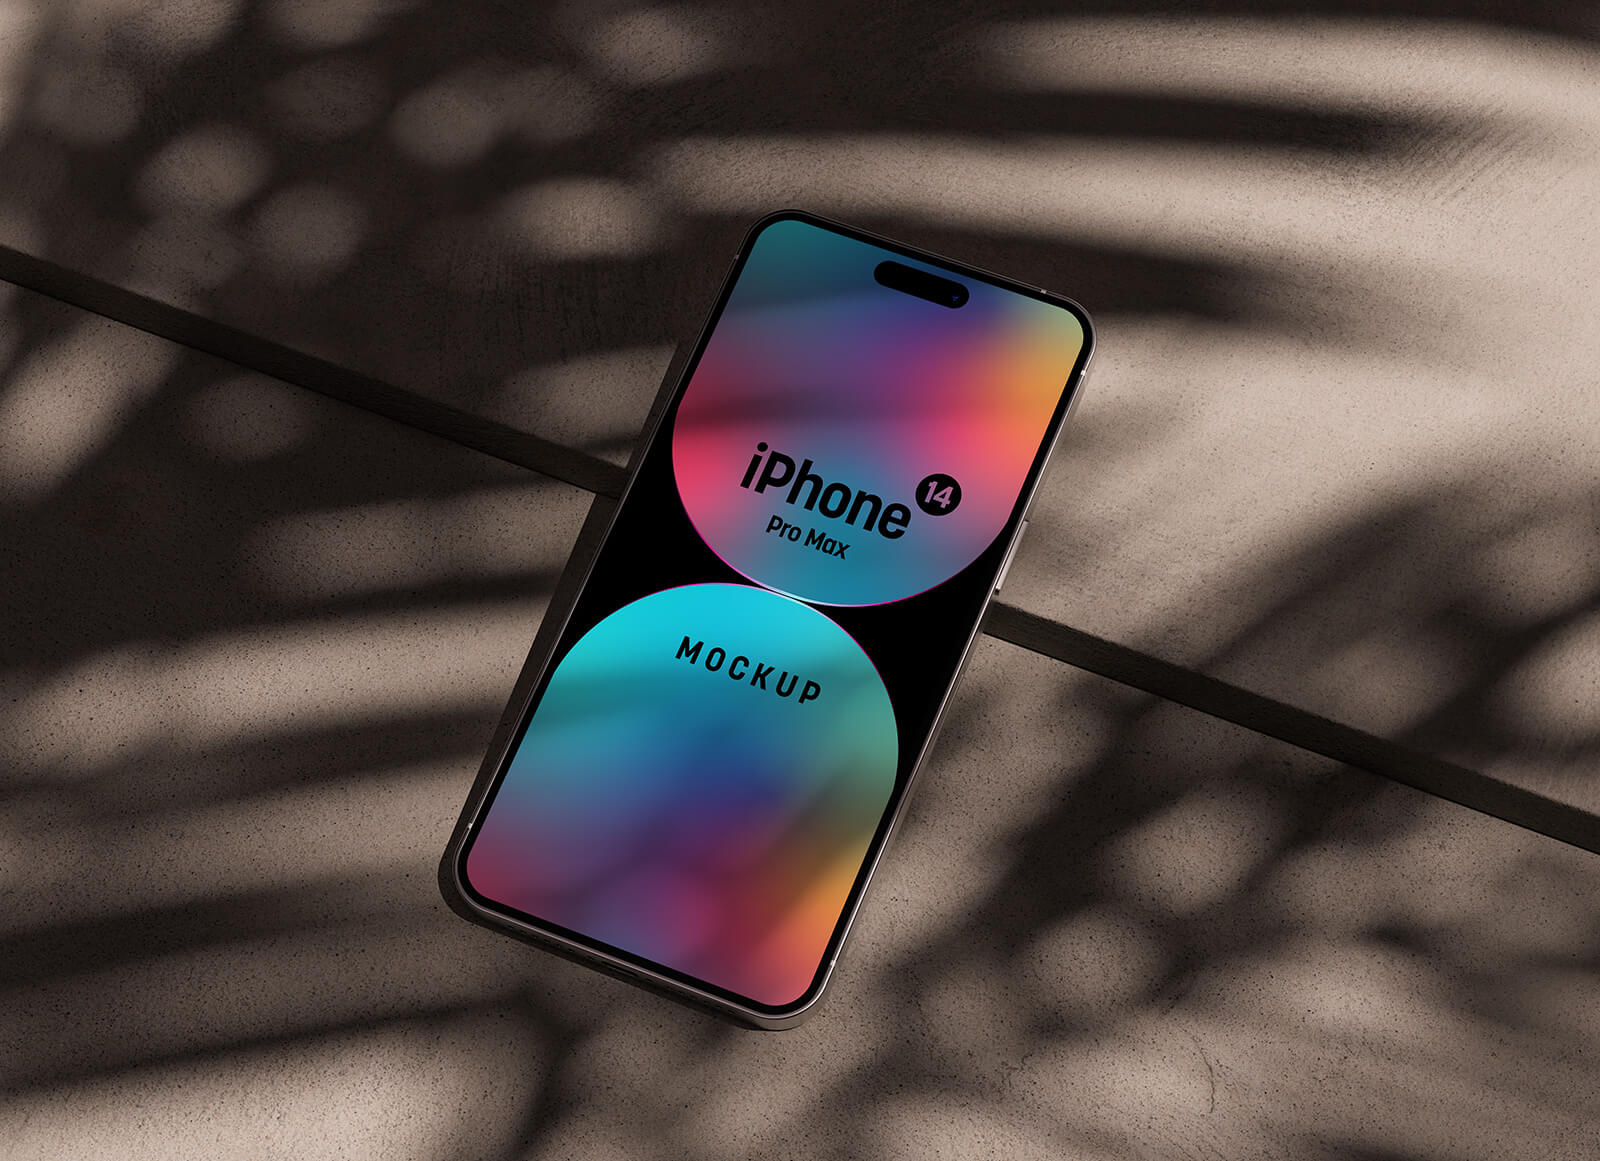 Free-iPhone-Pro-Max-Mockup-PSD-On-Concrete-Background